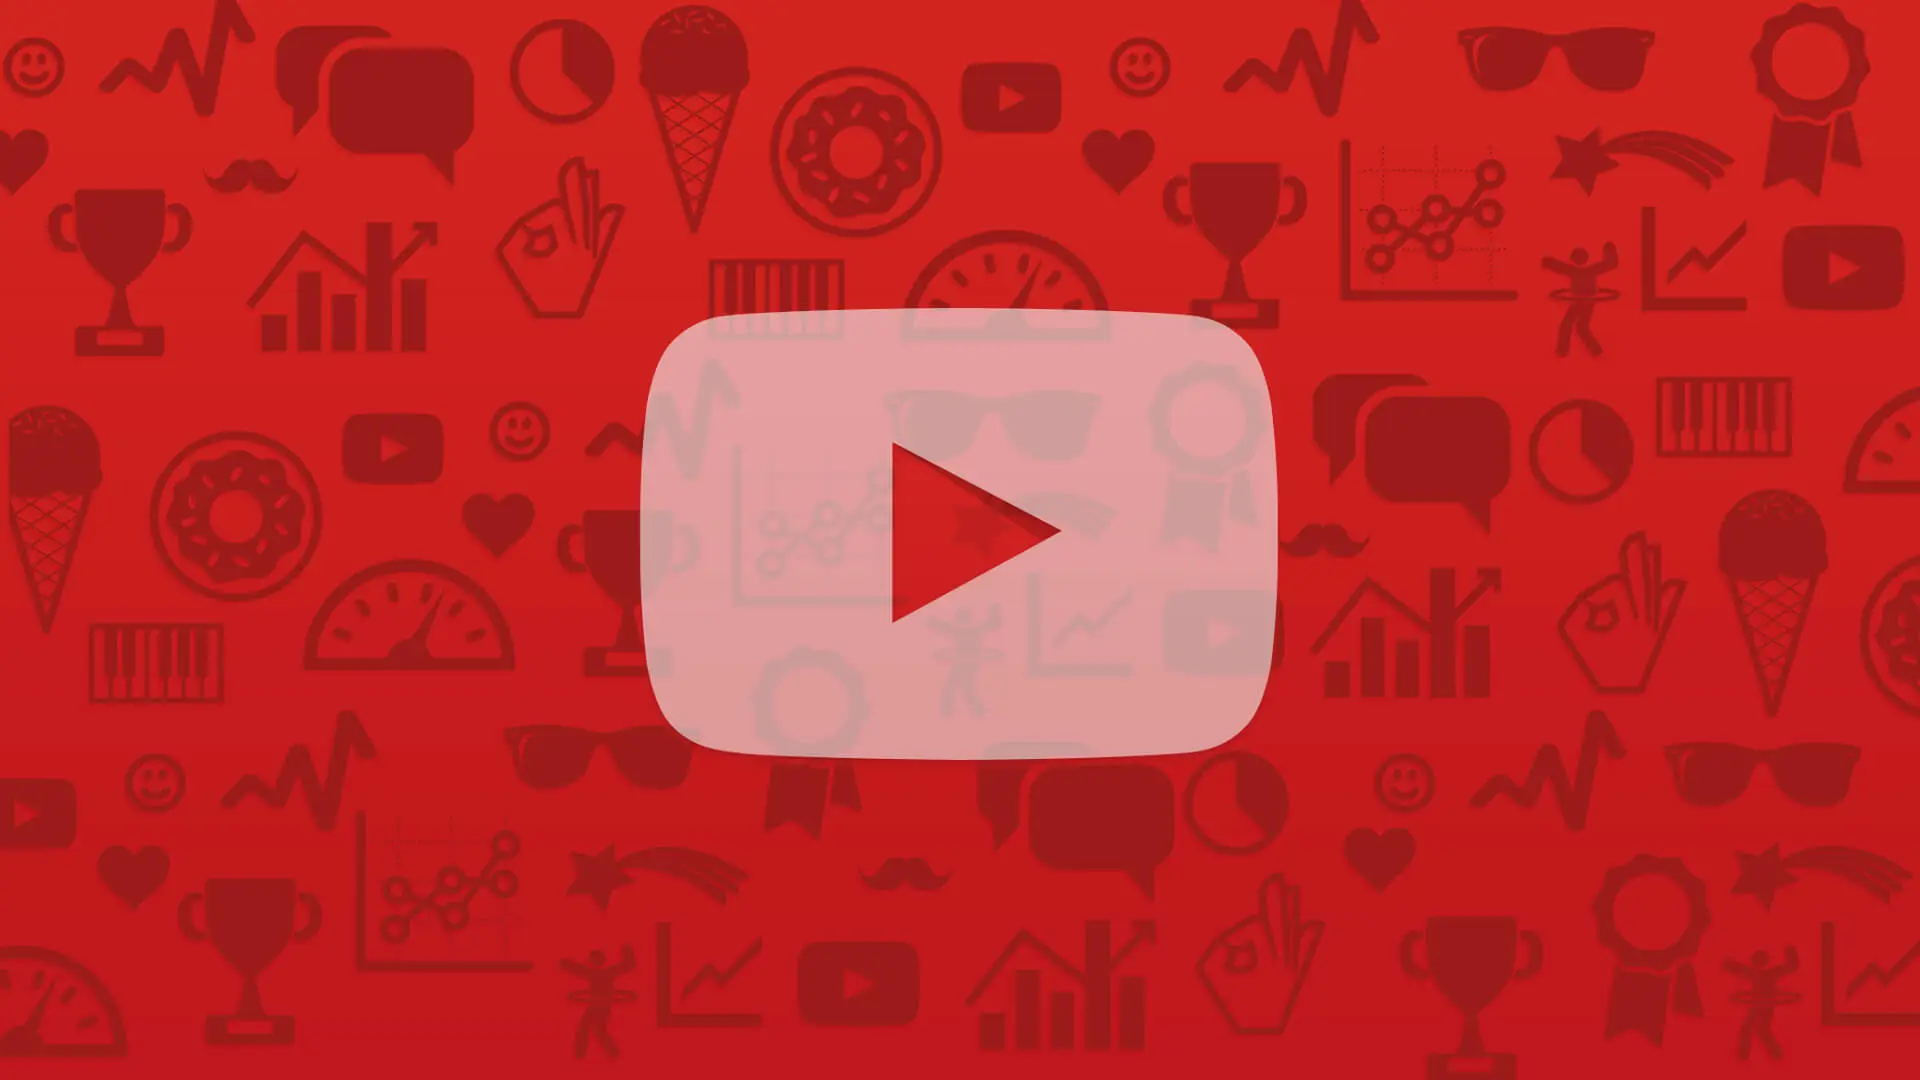 How to generate effective tags for your YouTube videos